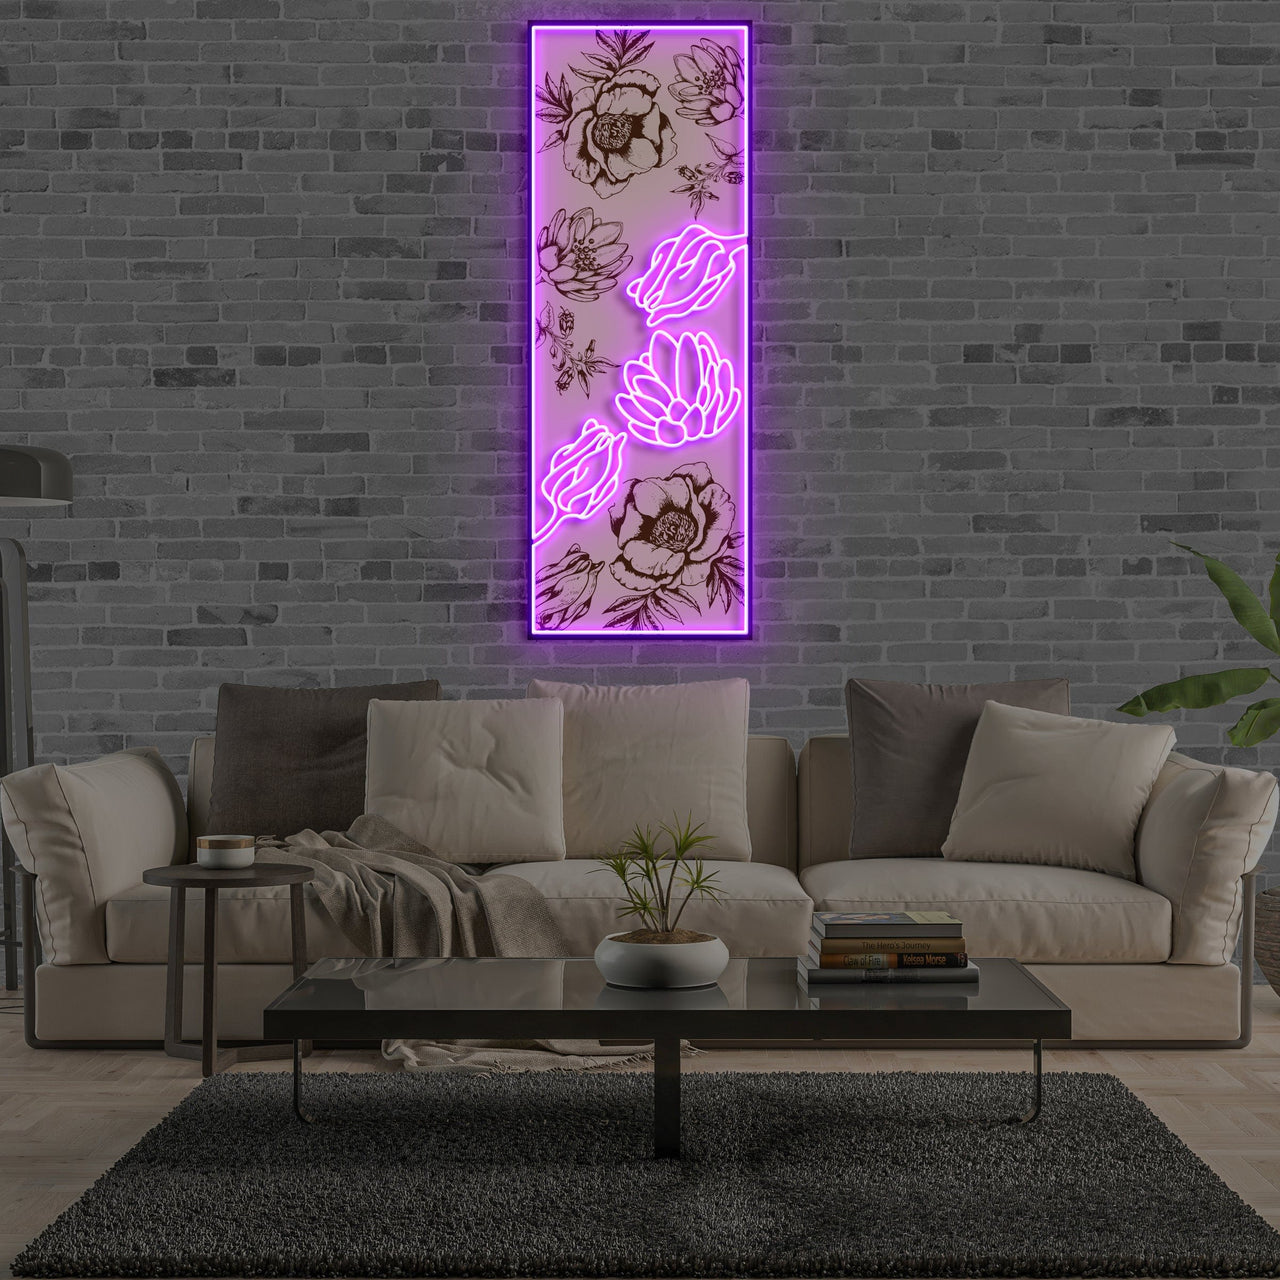 "Flower Wall V2" Neon x Acrylic Artwork by Neon Icons